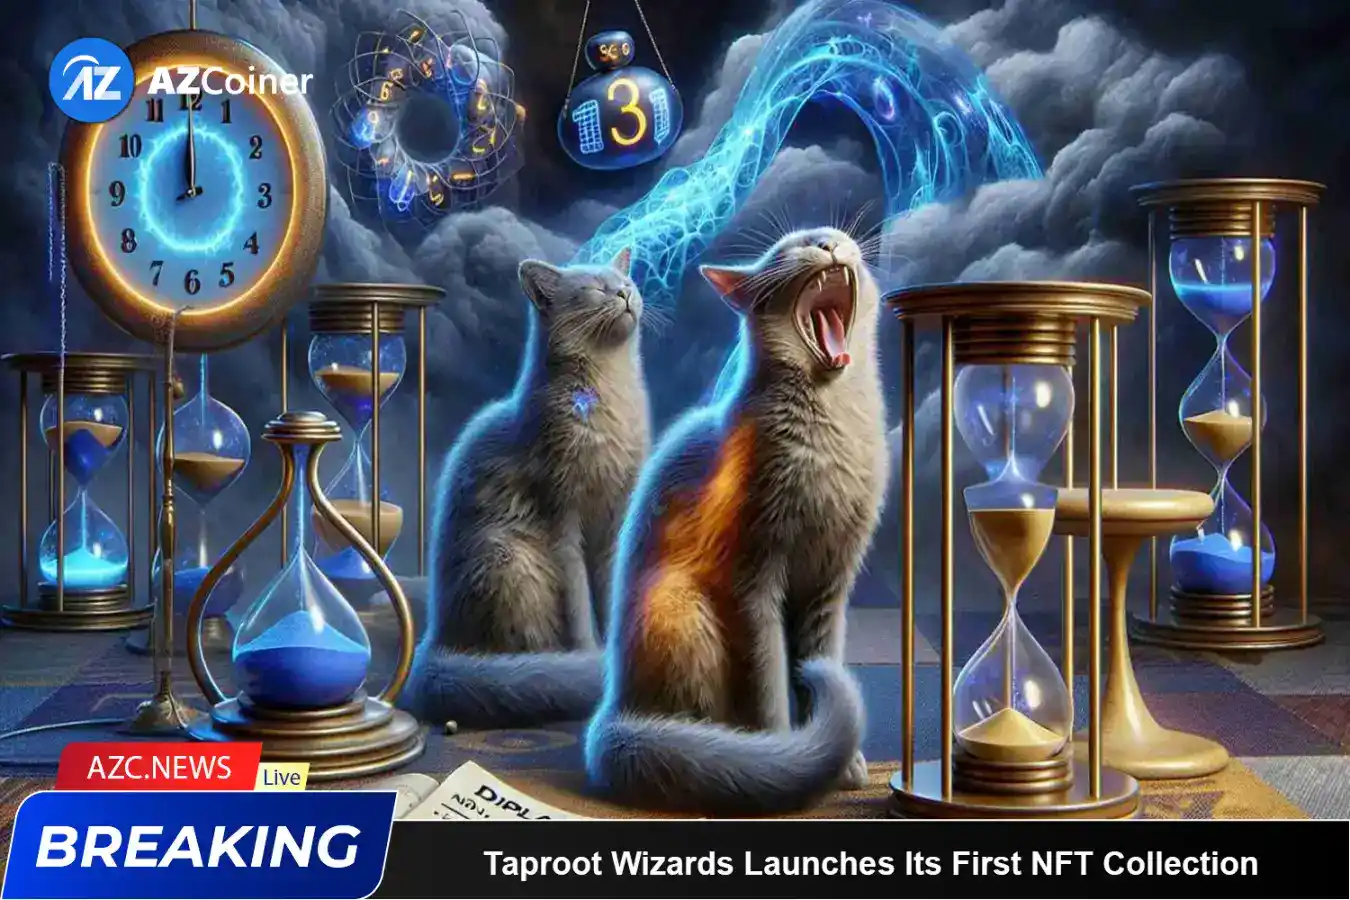 Taproot Wizards Successfully Launches Its First Nft Collection_65d5d25f491c4.webp